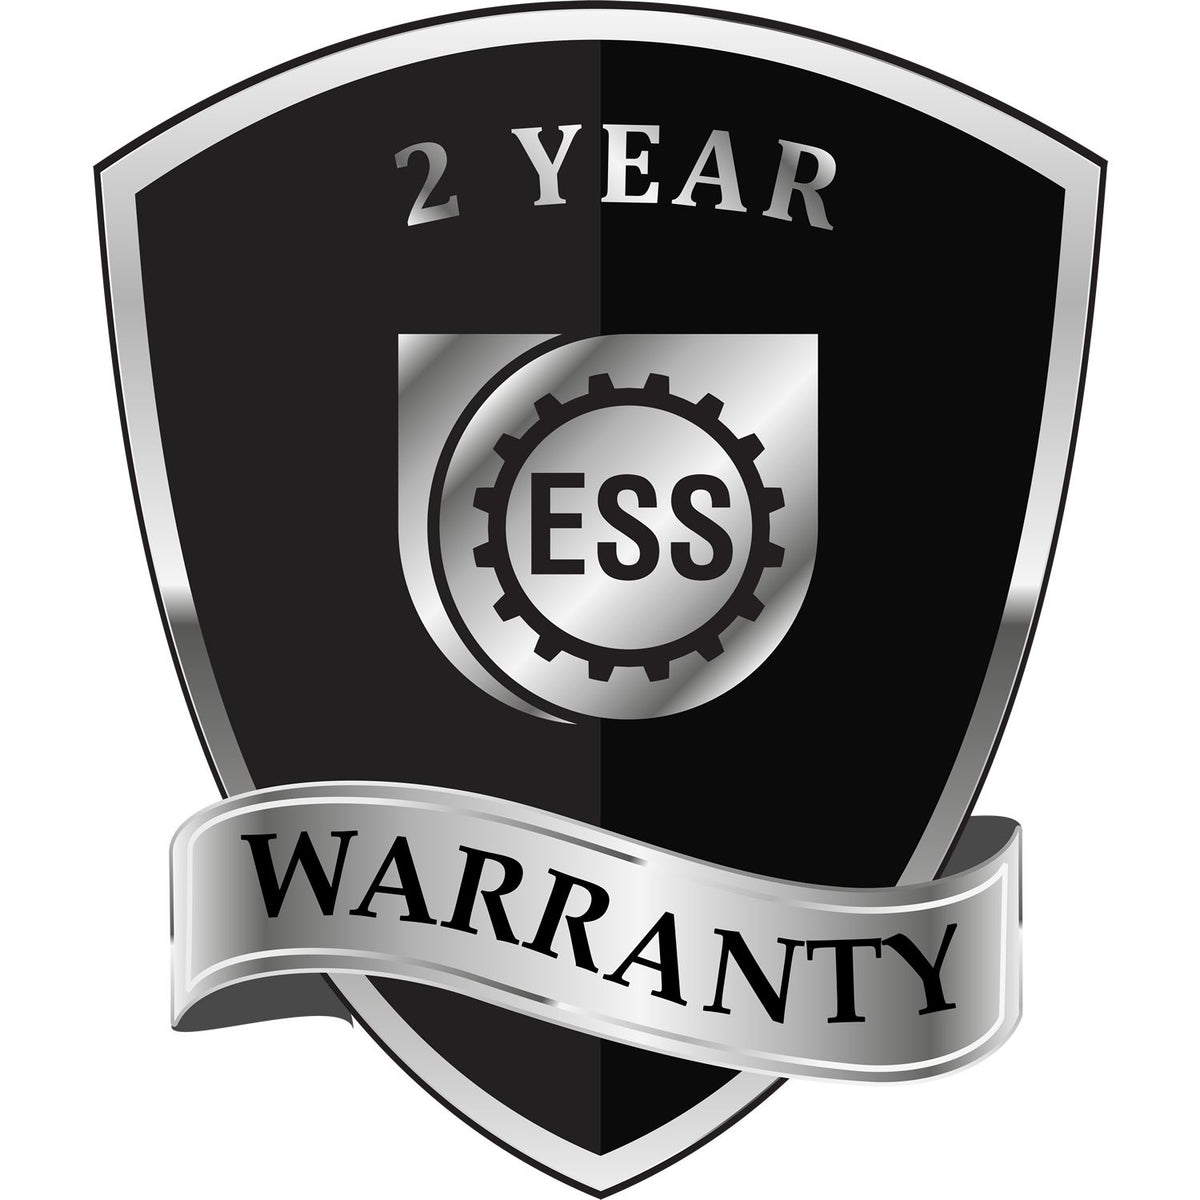 A badge or emblem showing a warranty icon for the State of Indiana Long Reach Architectural Embossing Seal